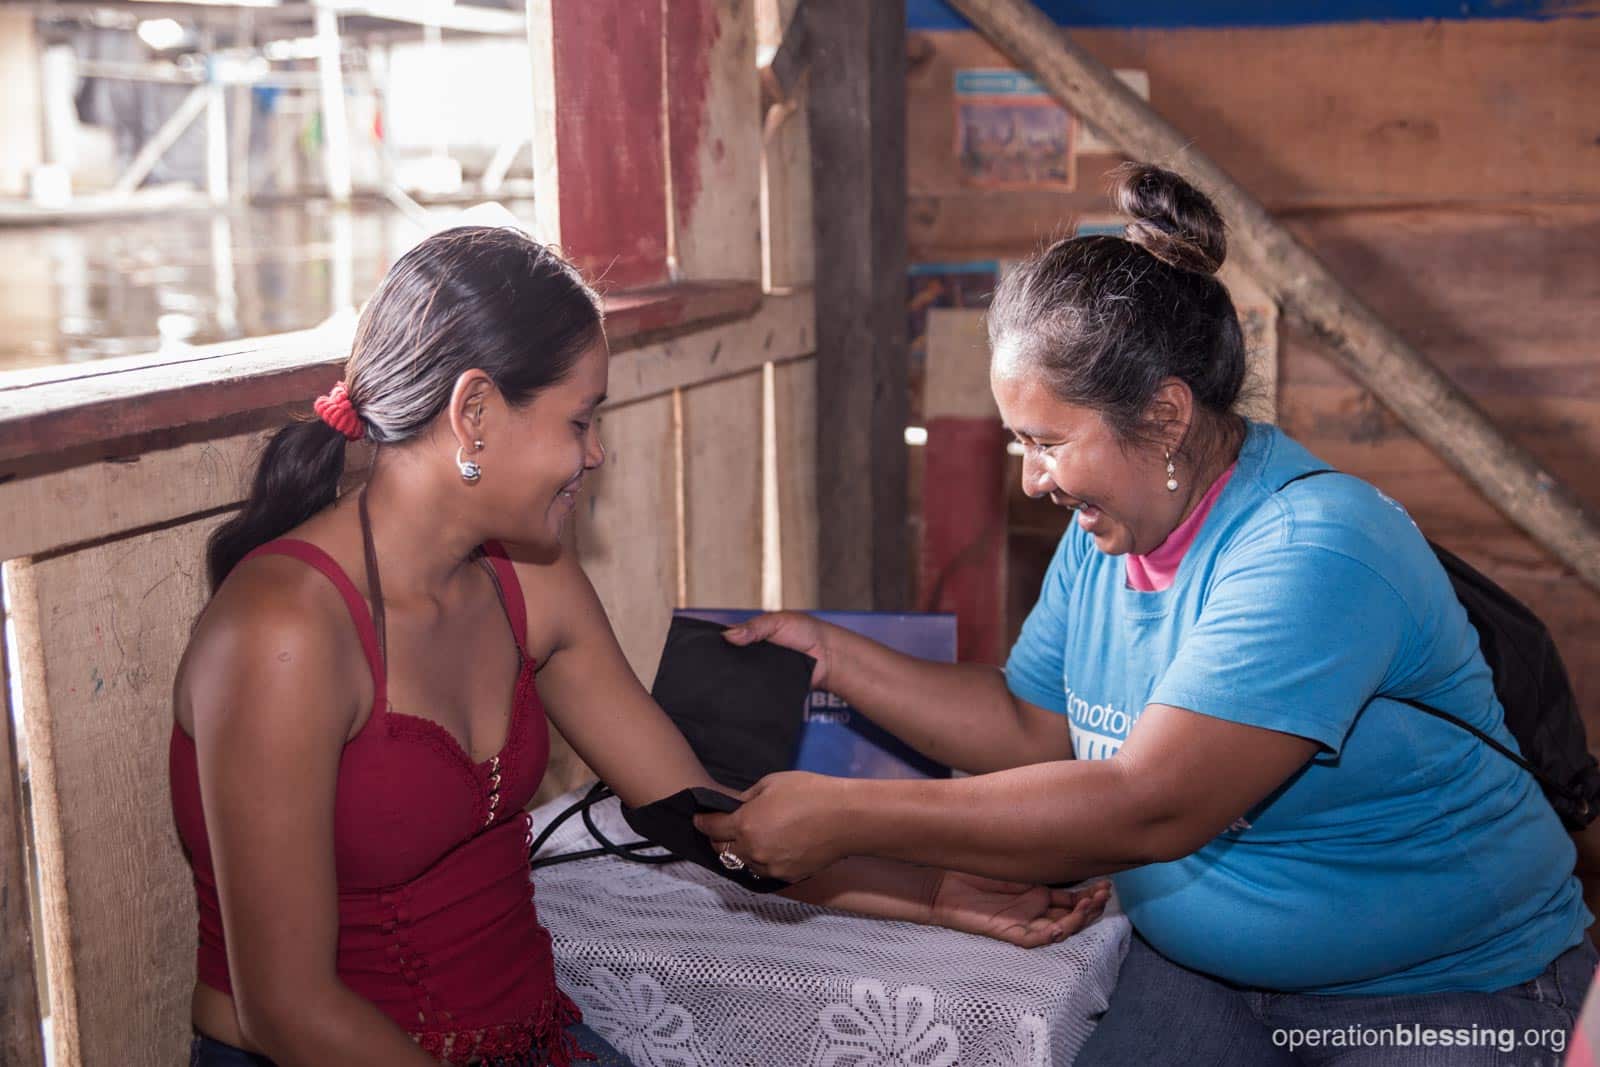  Nadia takes a woman’s blood pressure. You can see her love of helping others on her face.